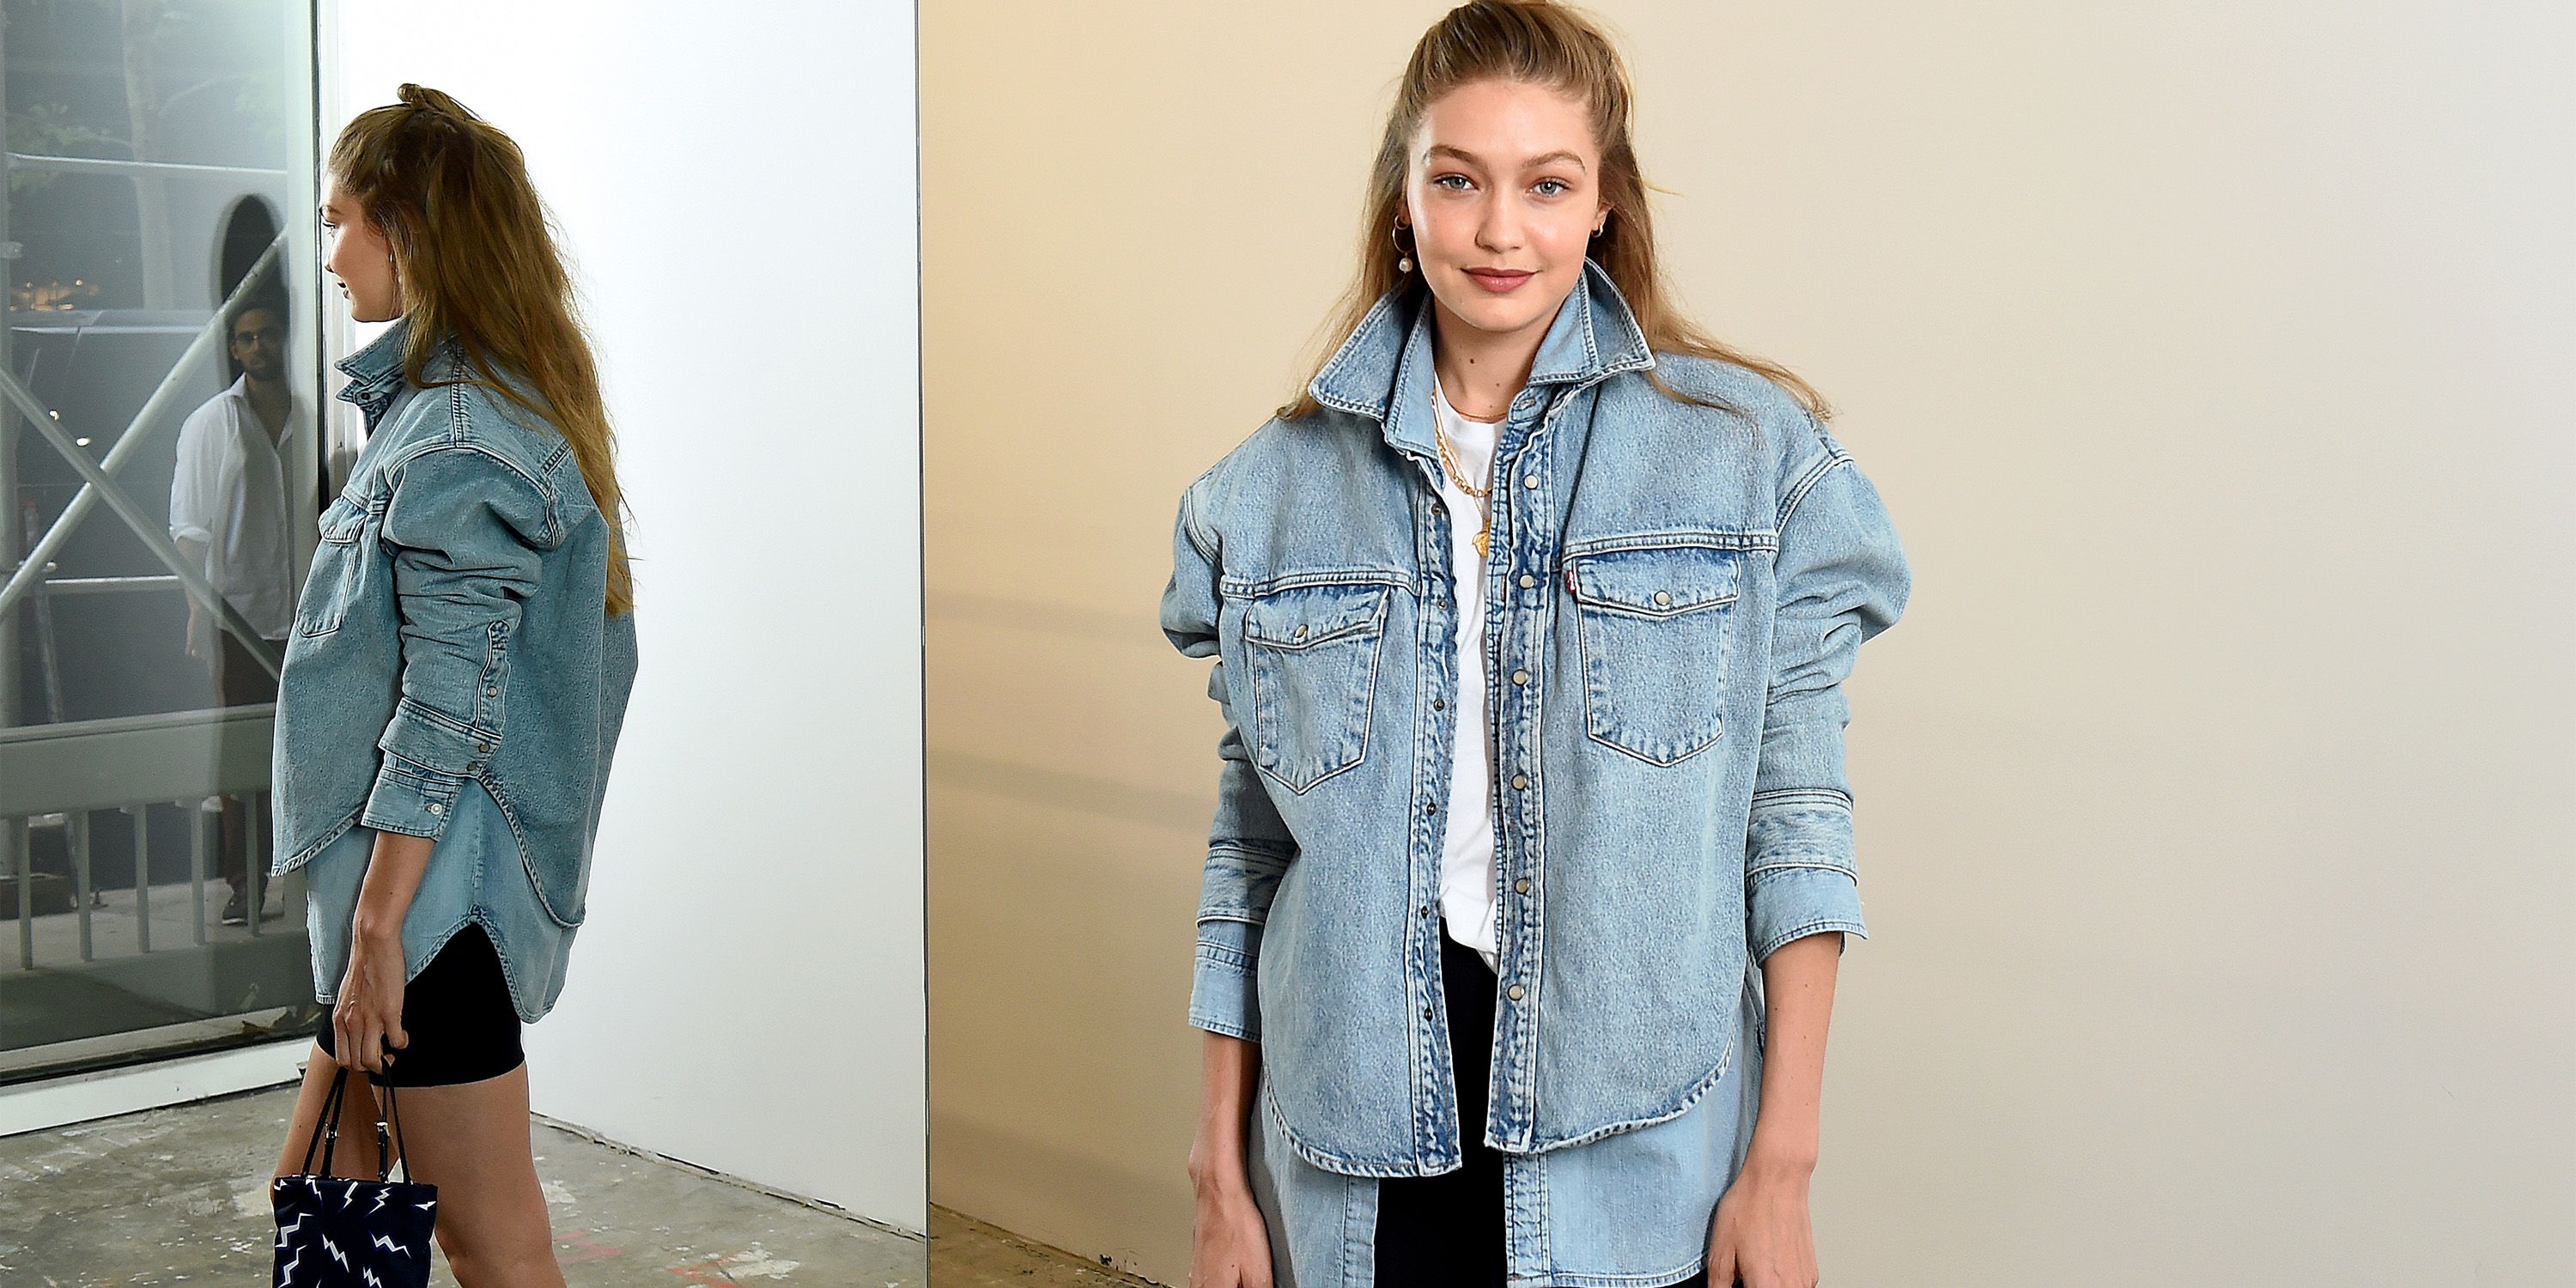 Gigi Hadid's Cutout Top Was Styled With Birkenstocks For An Easy Summer Look